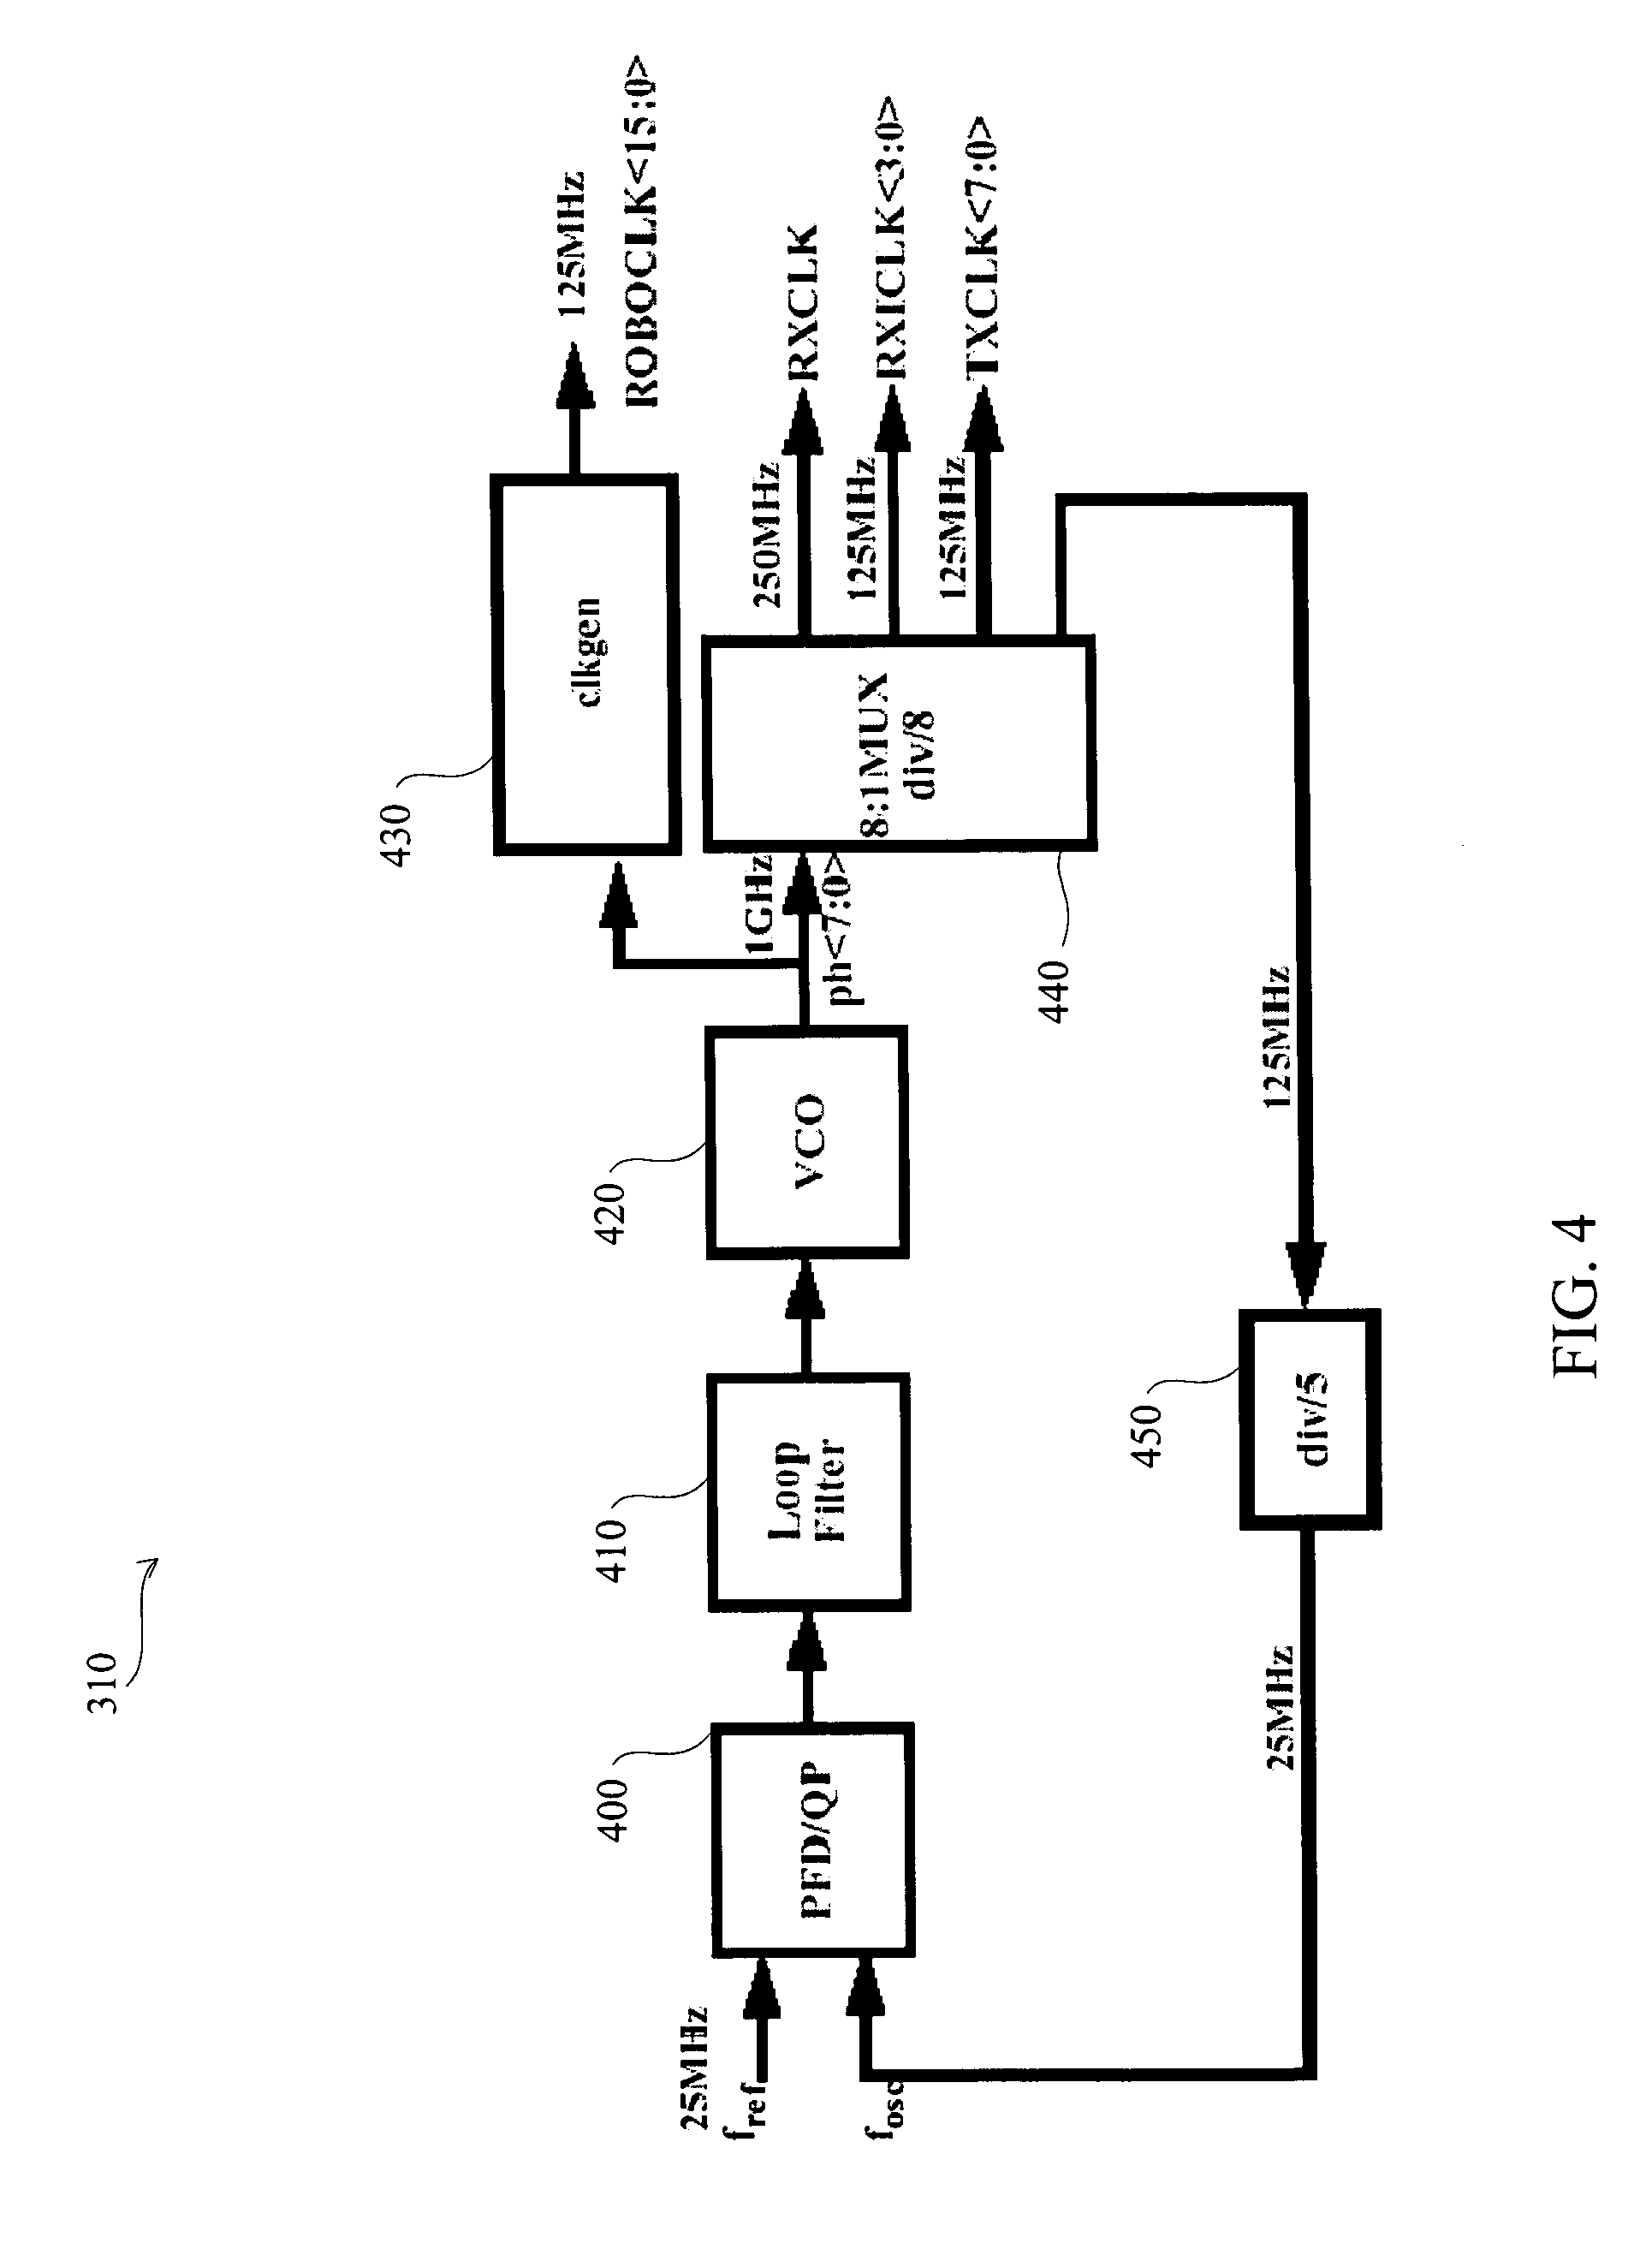 System and method generating a delayed clock output